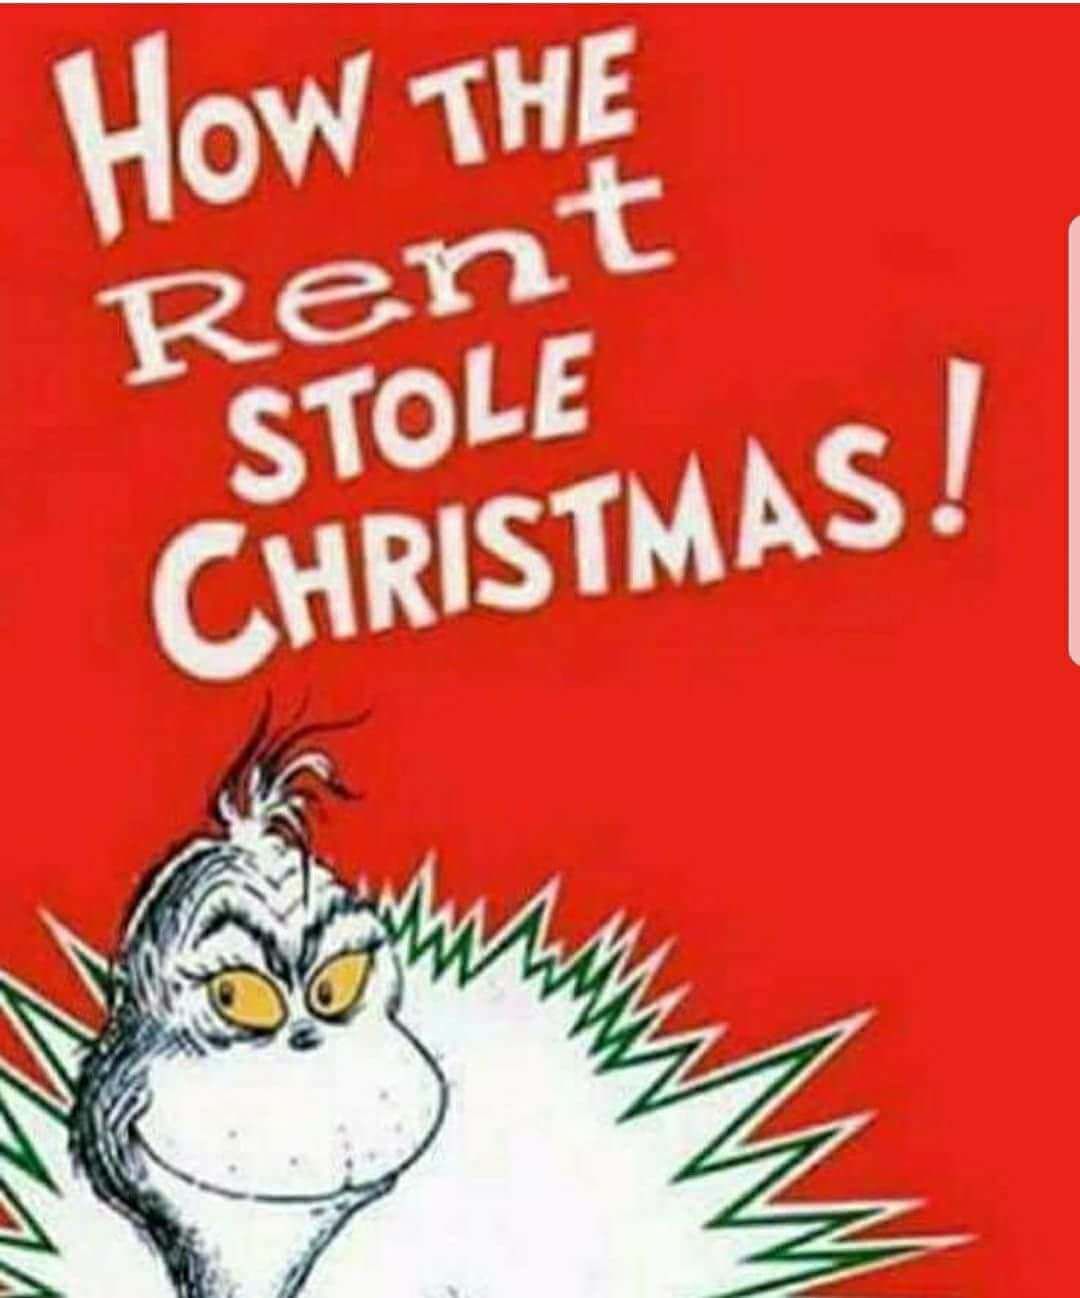 Grinch ain't shit anymore